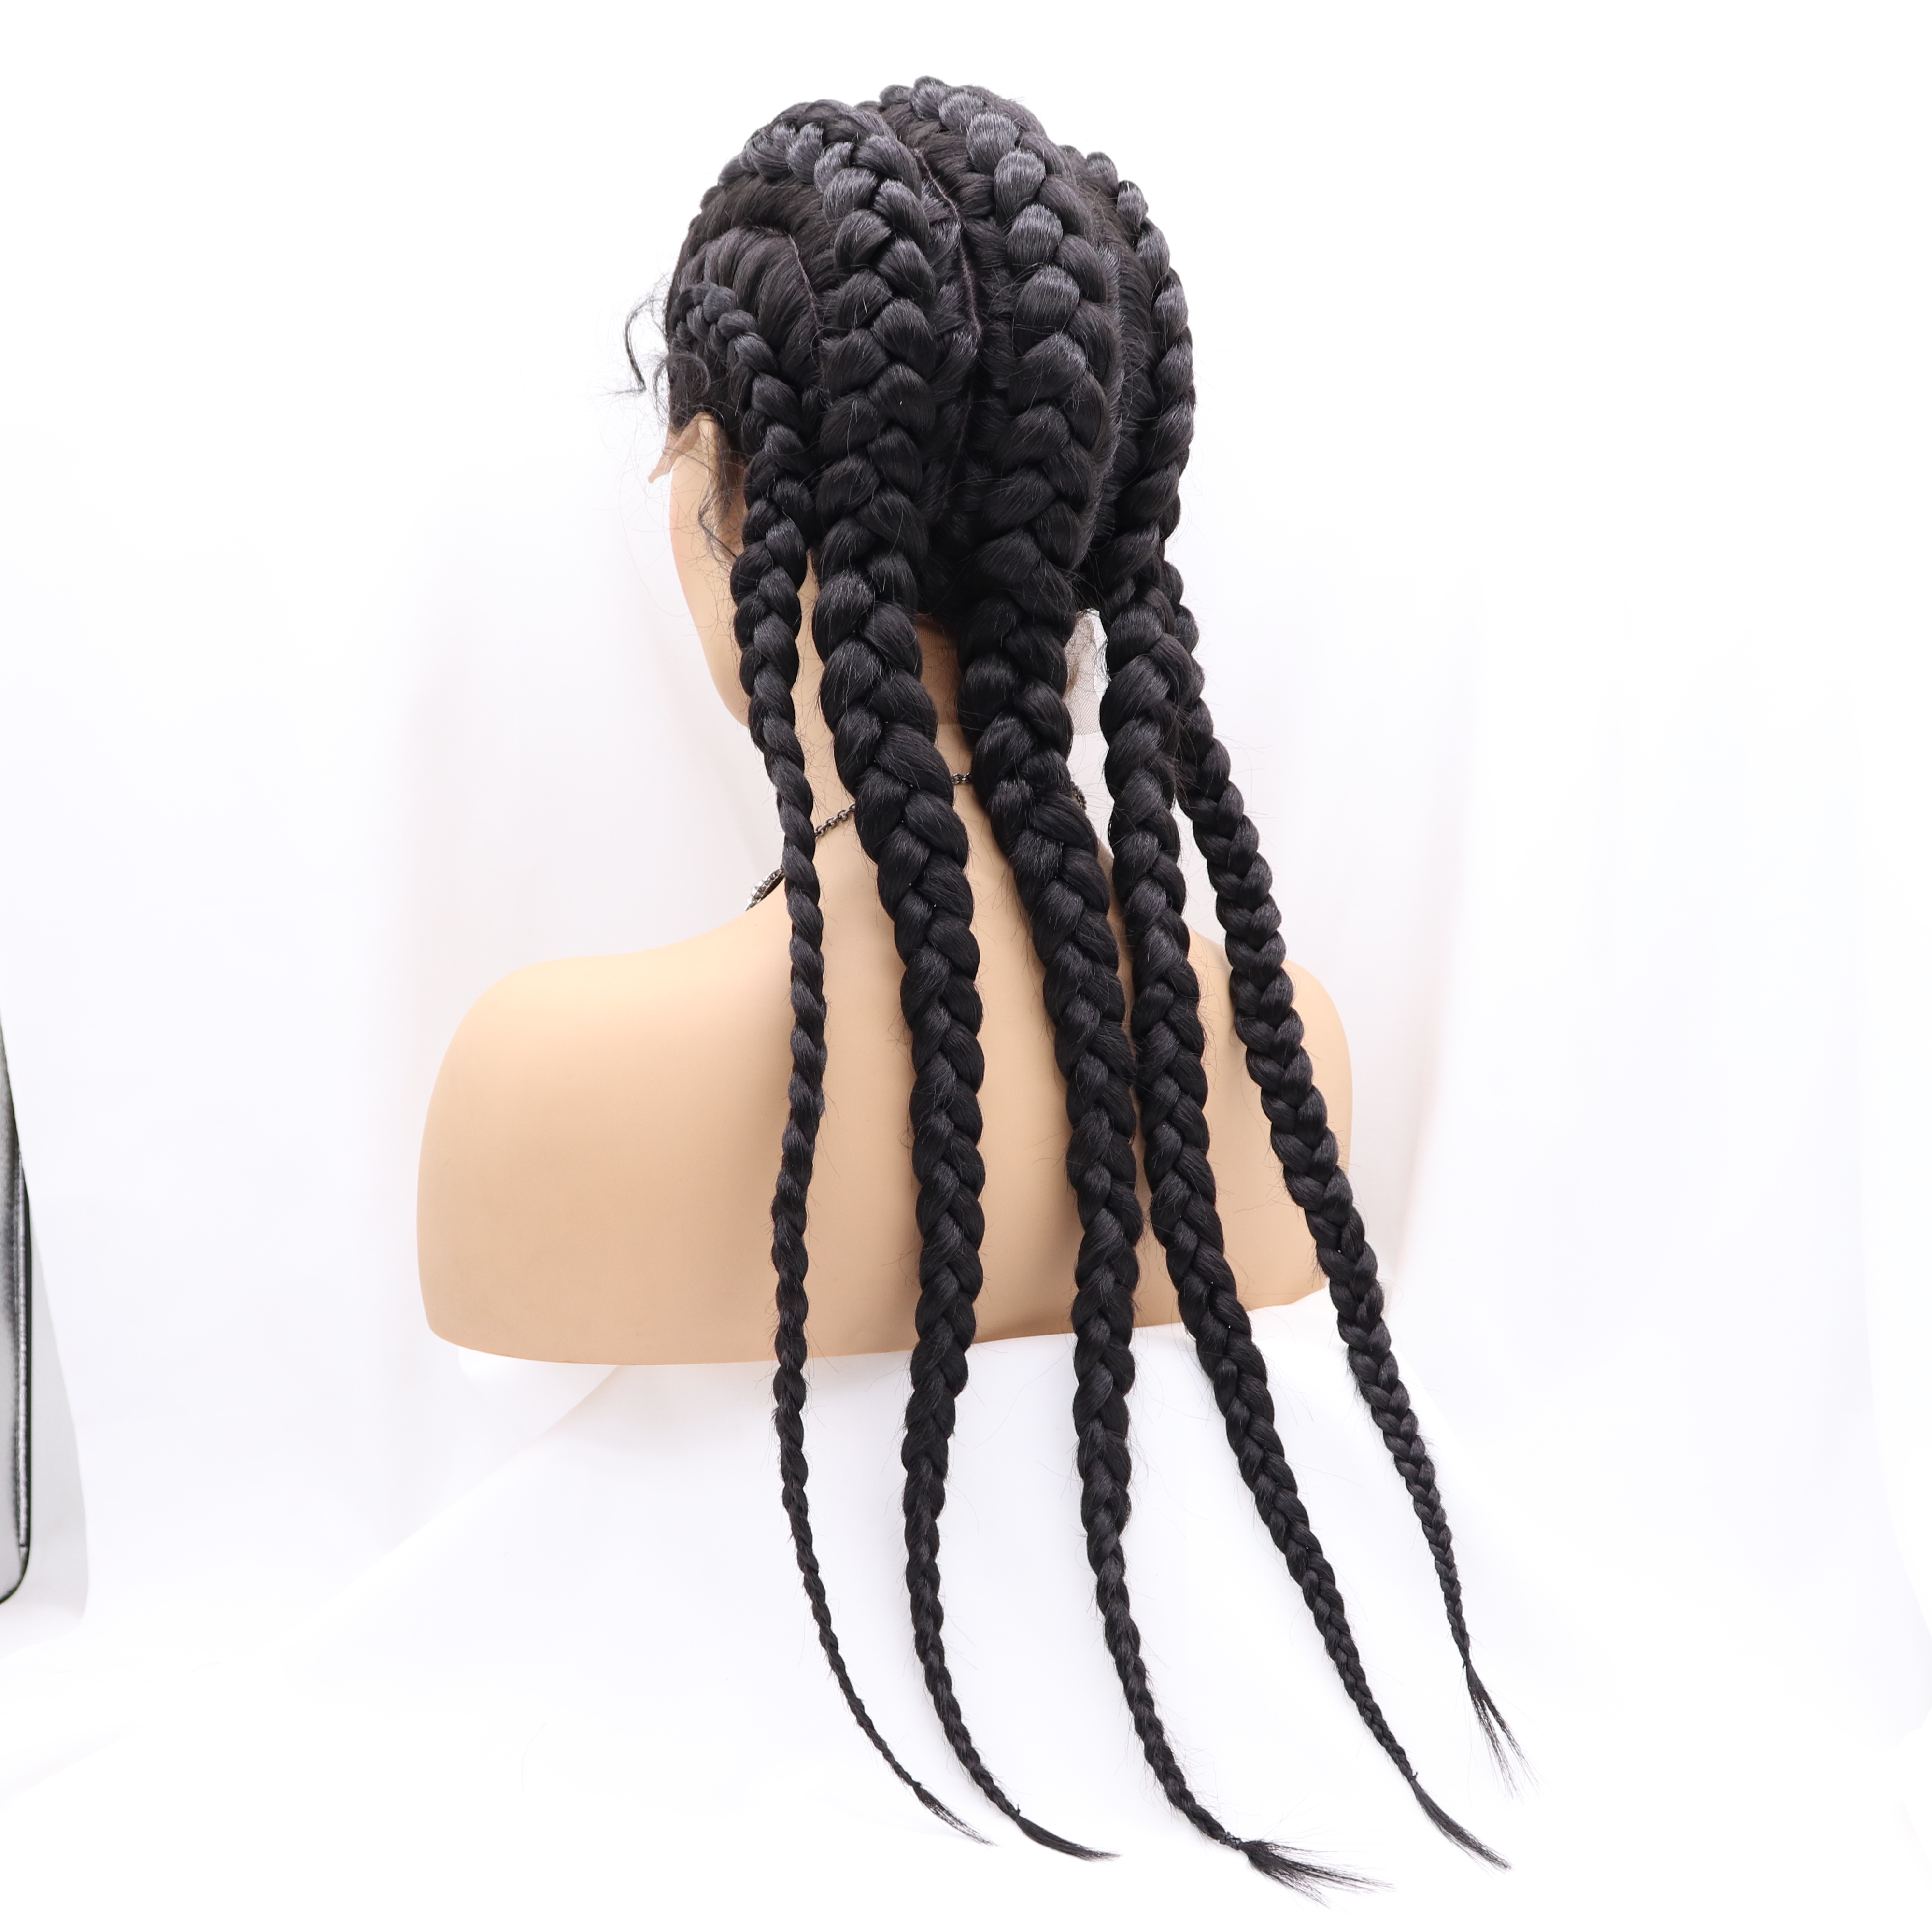 Wholesale transparent lace braided wigs hair accessories and braids wigs for black women butterfly braid wigs